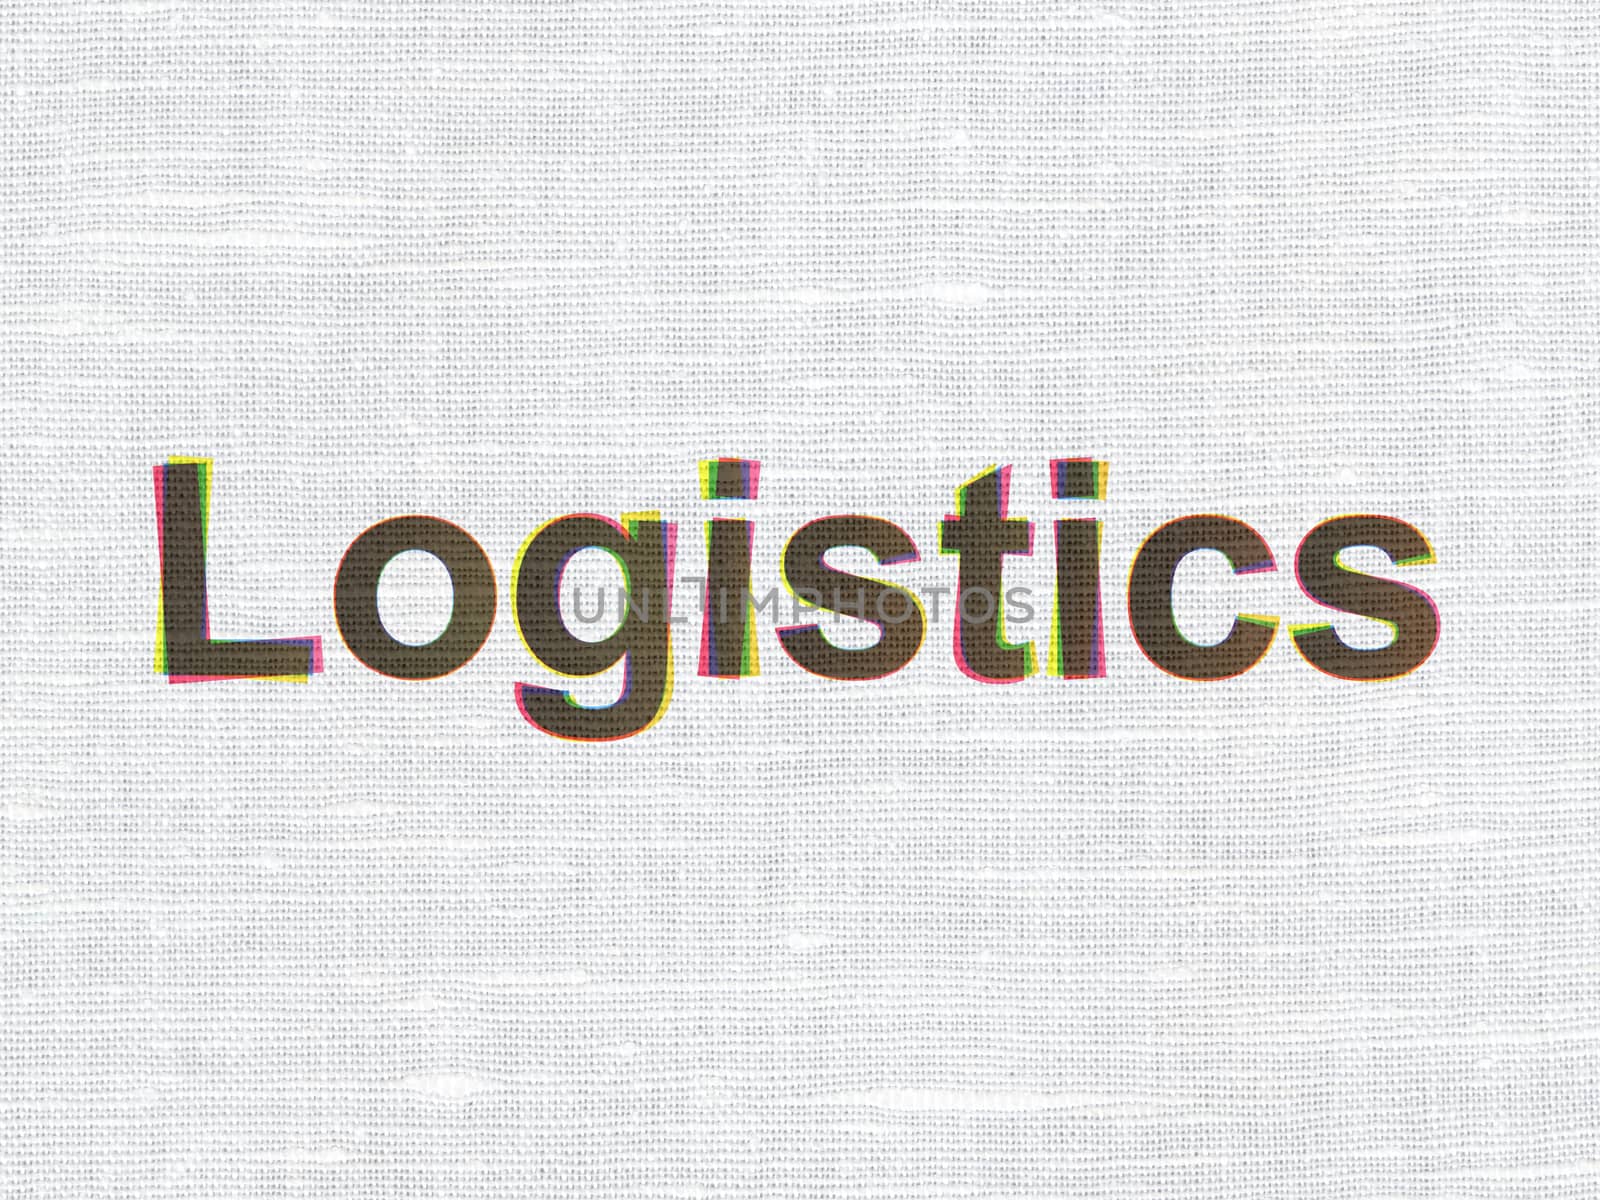 Finance concept: Logistics on fabric texture background by maxkabakov